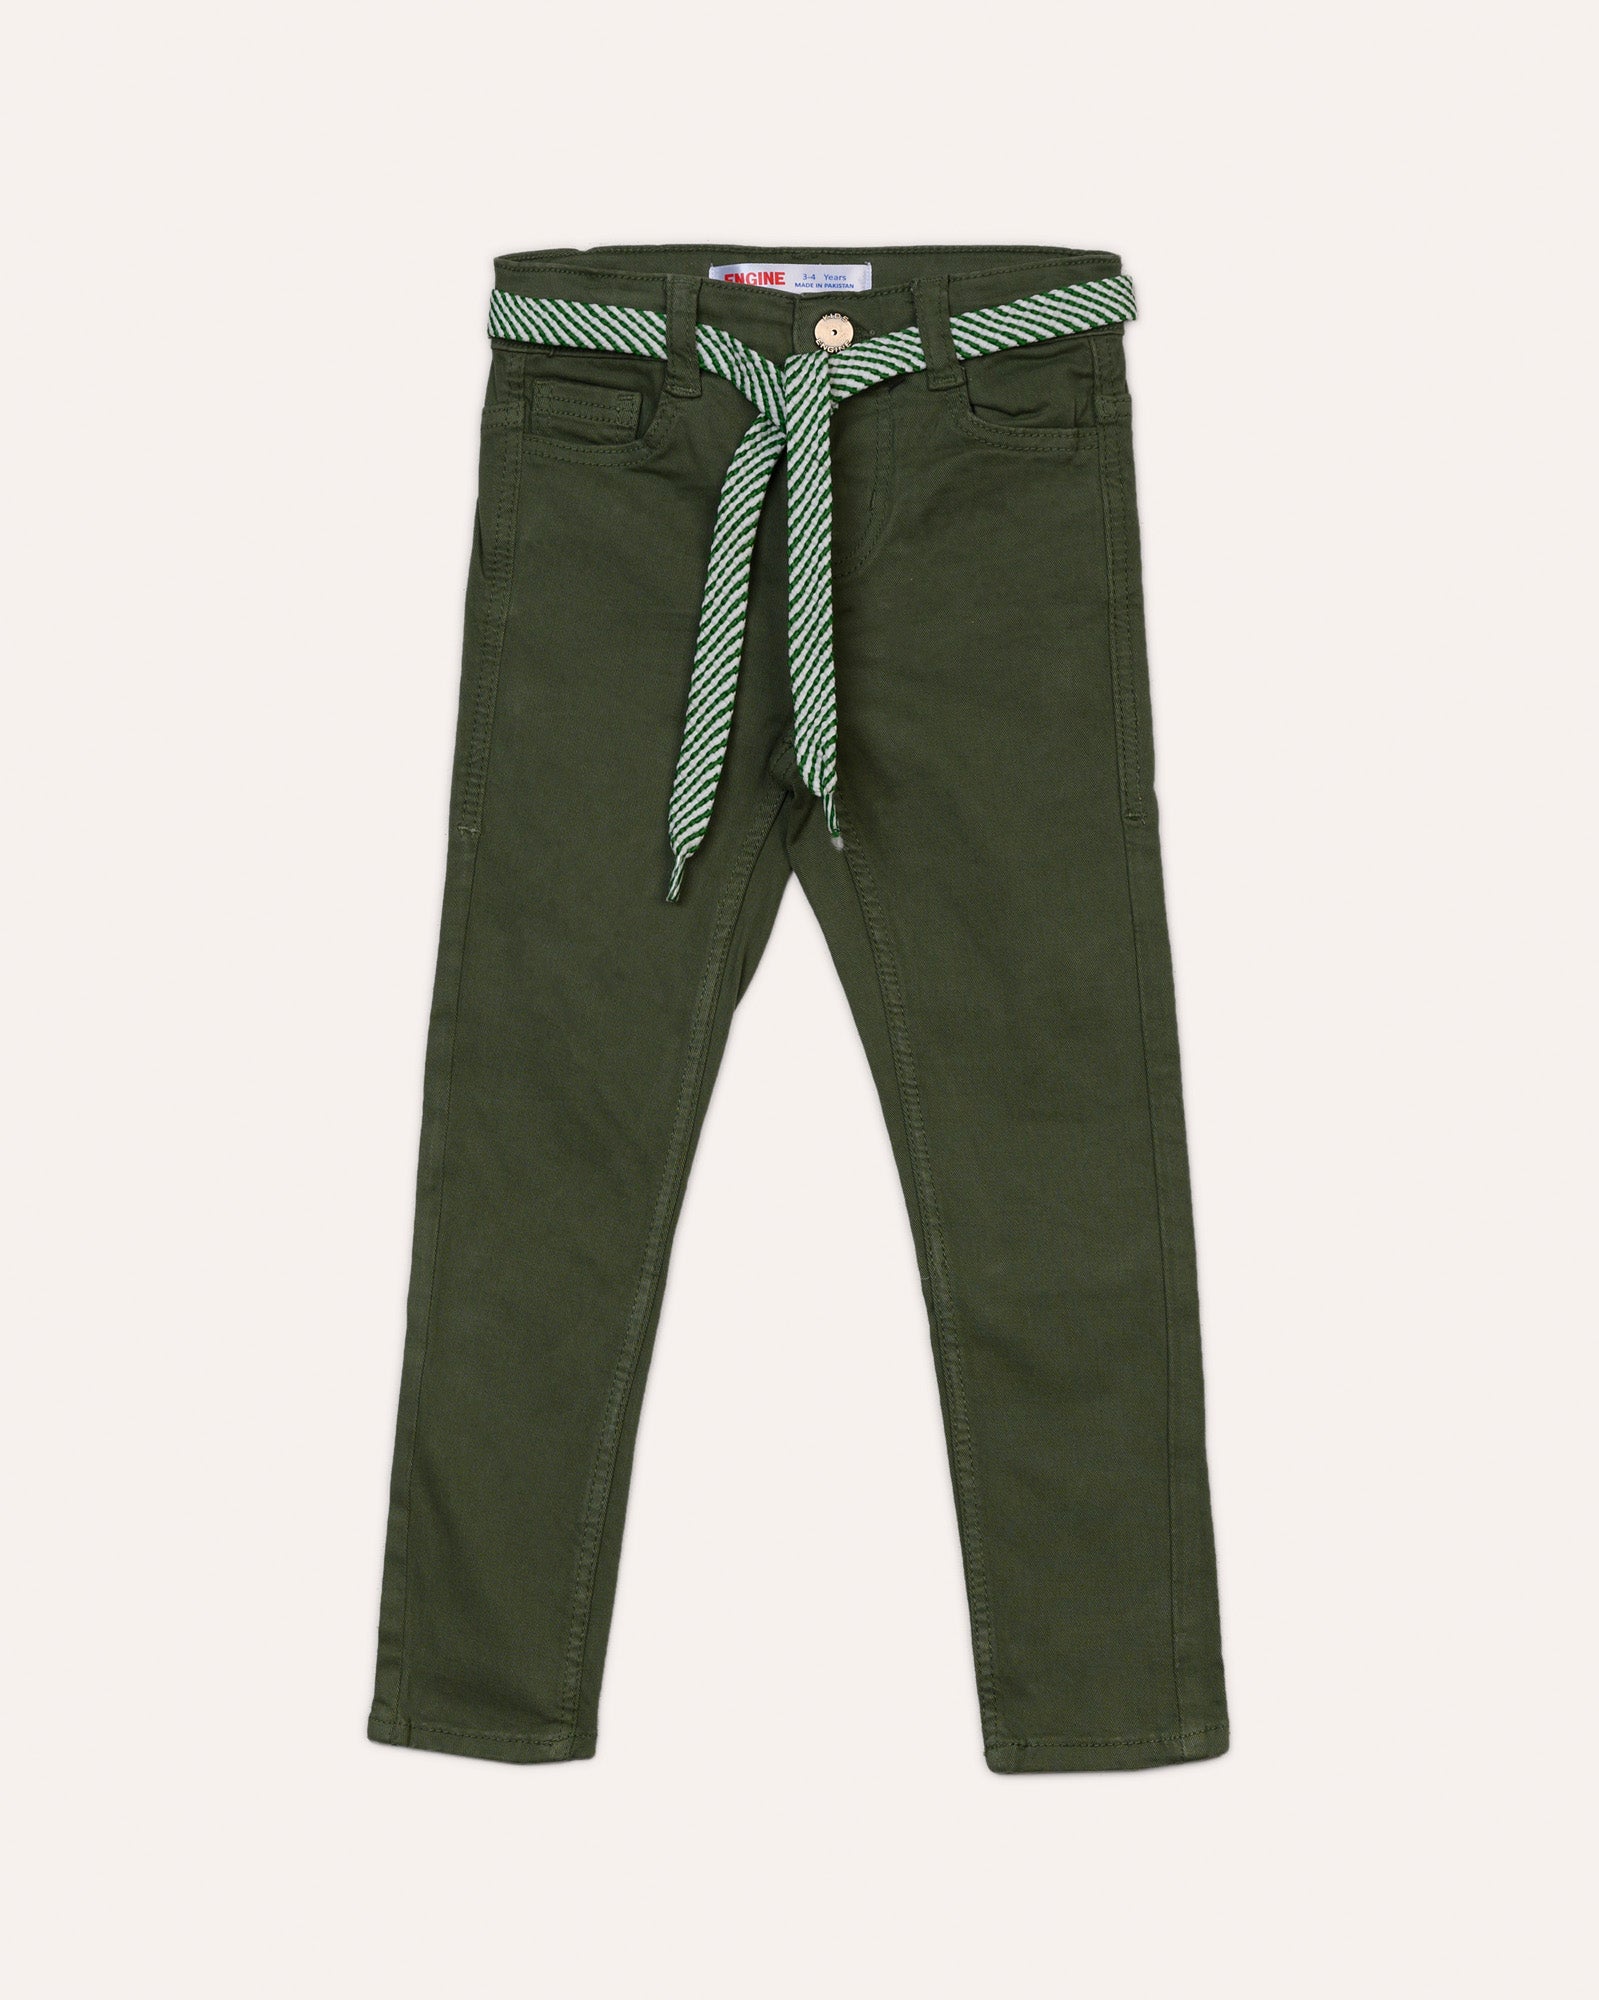 Color Pants For BOYS - ENGINE